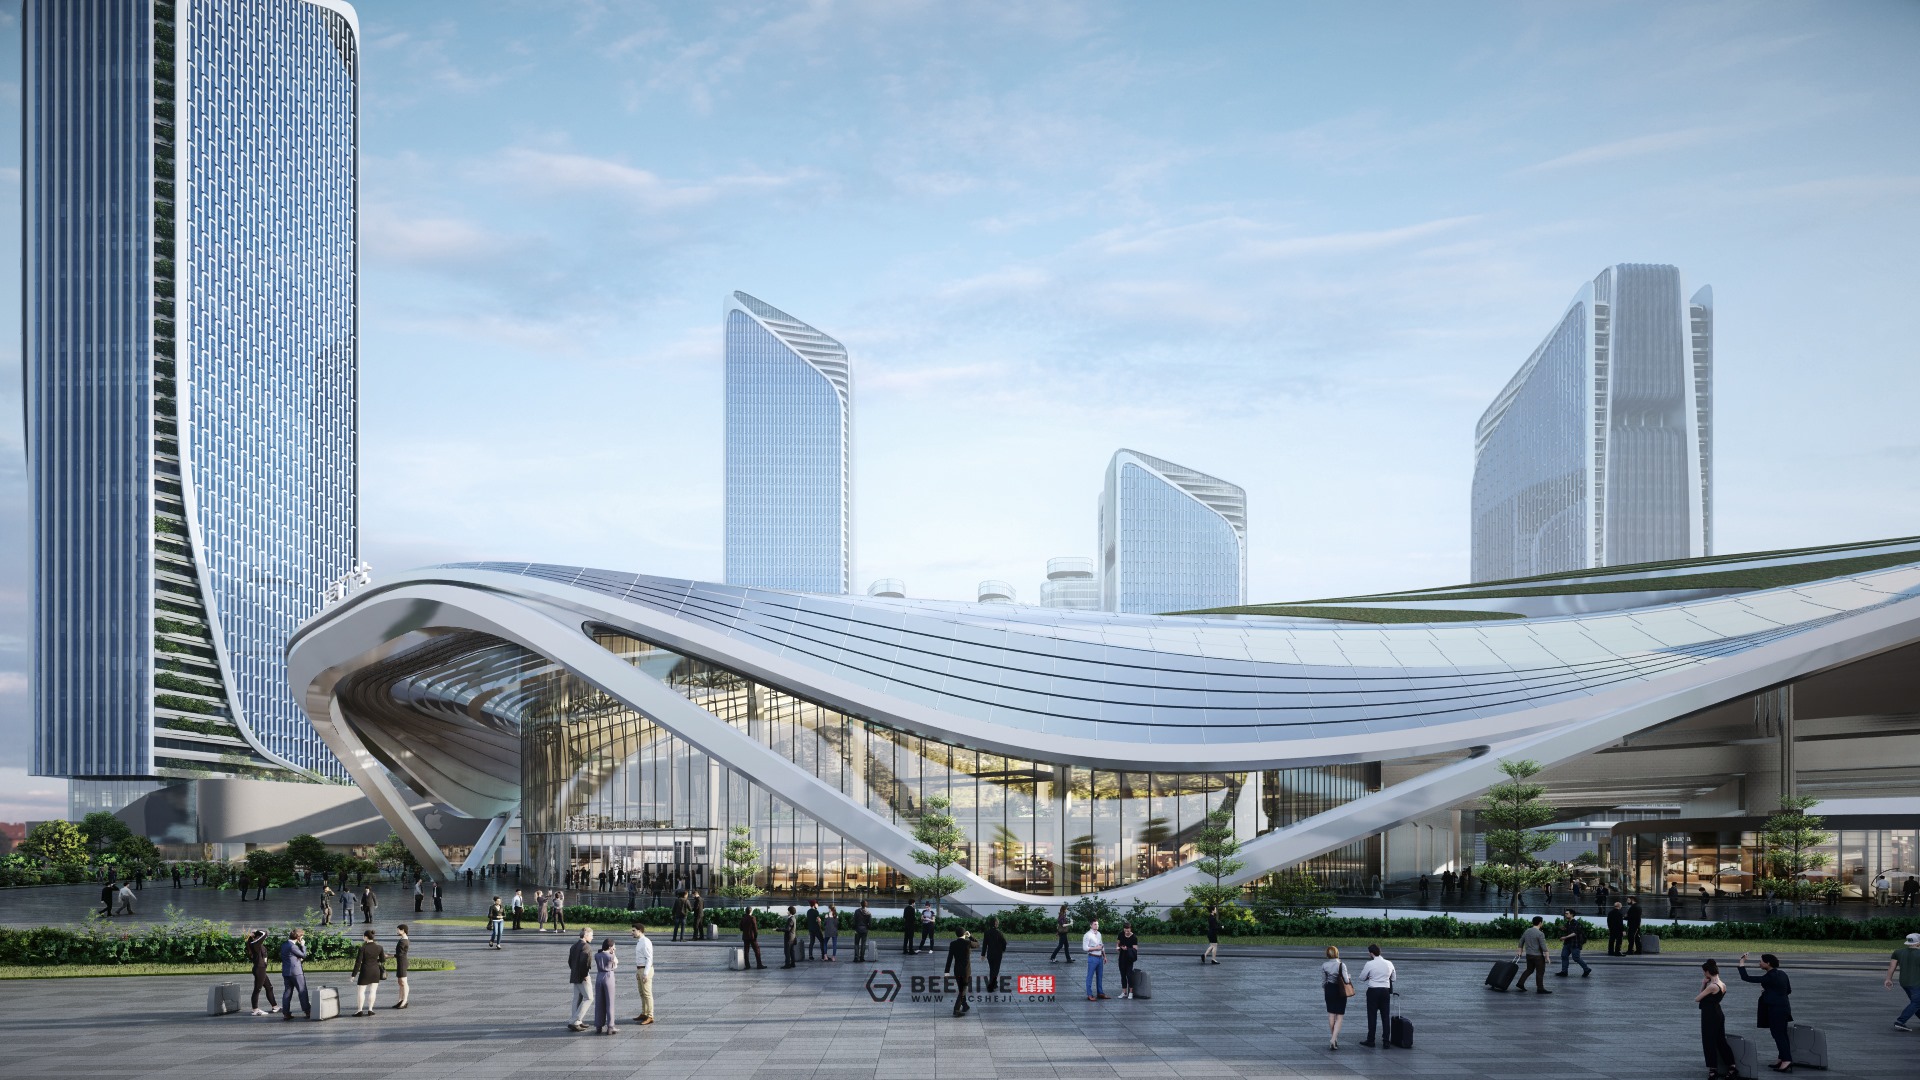 Humen High Speed Rail Station Expansion Project Master Plan, rendered in Lumion 10 by Beehive. 